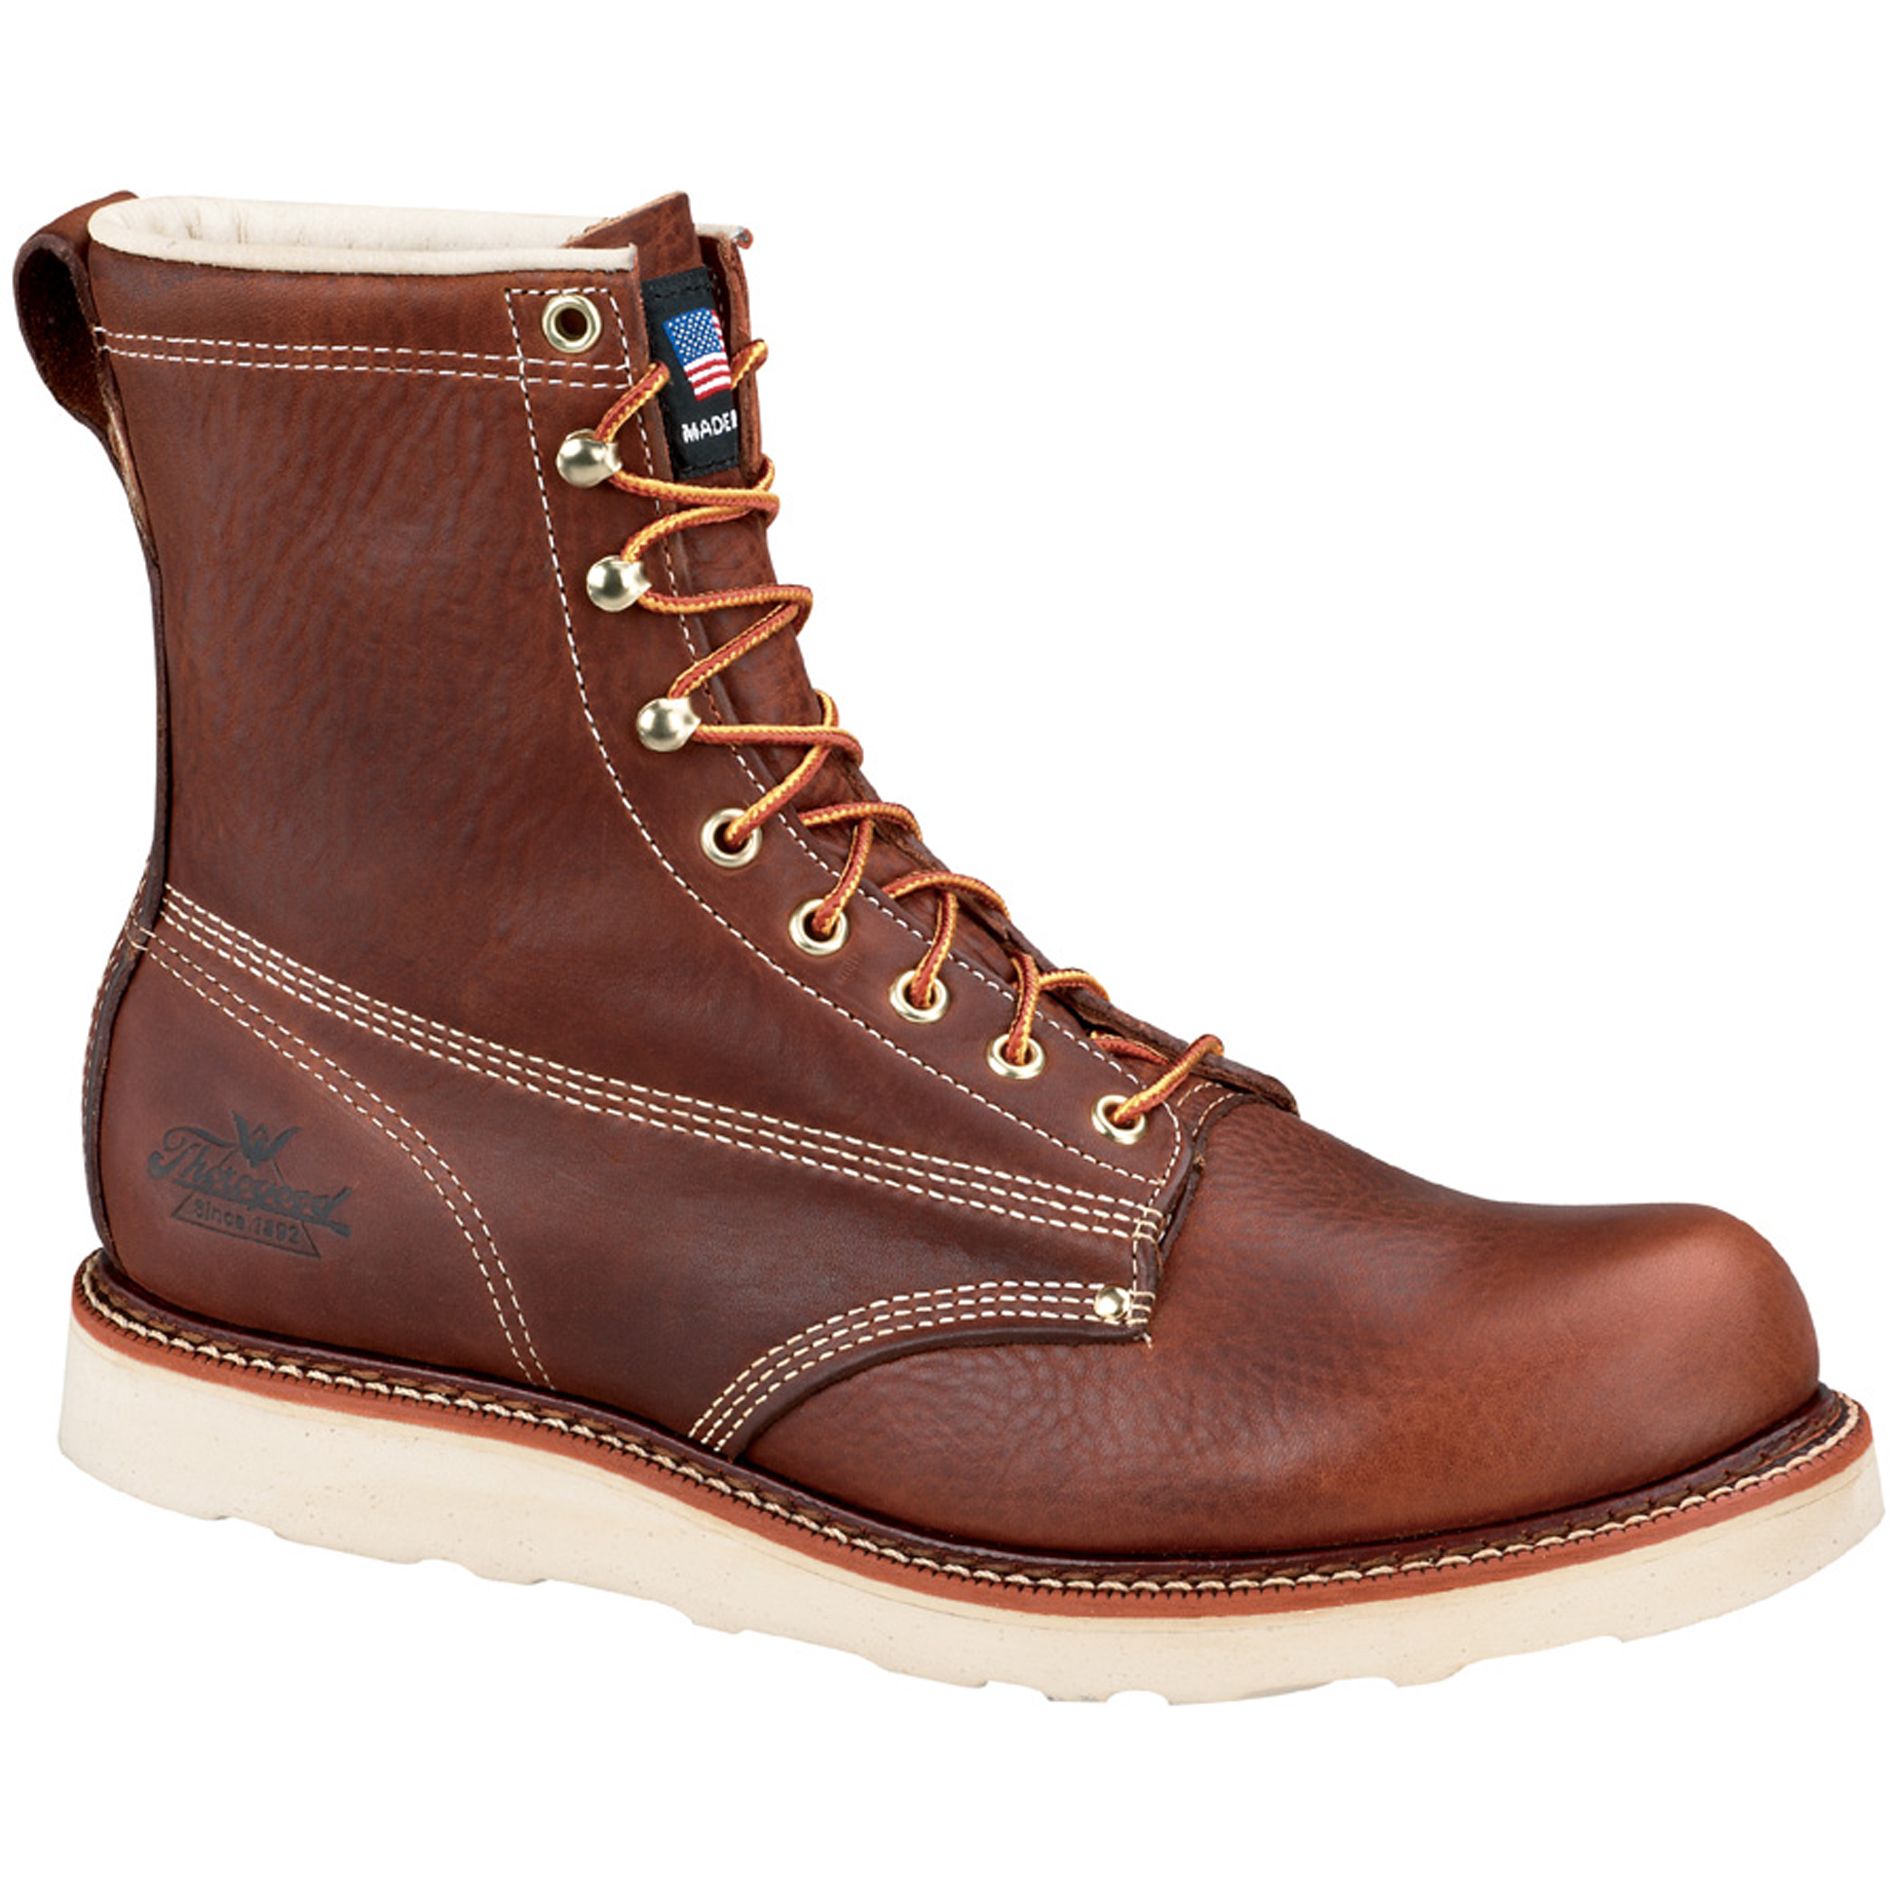 Thorogood Men's American Heritage 8" Soft Toe Work Boot 814-4364 Wide Width Available - Brown